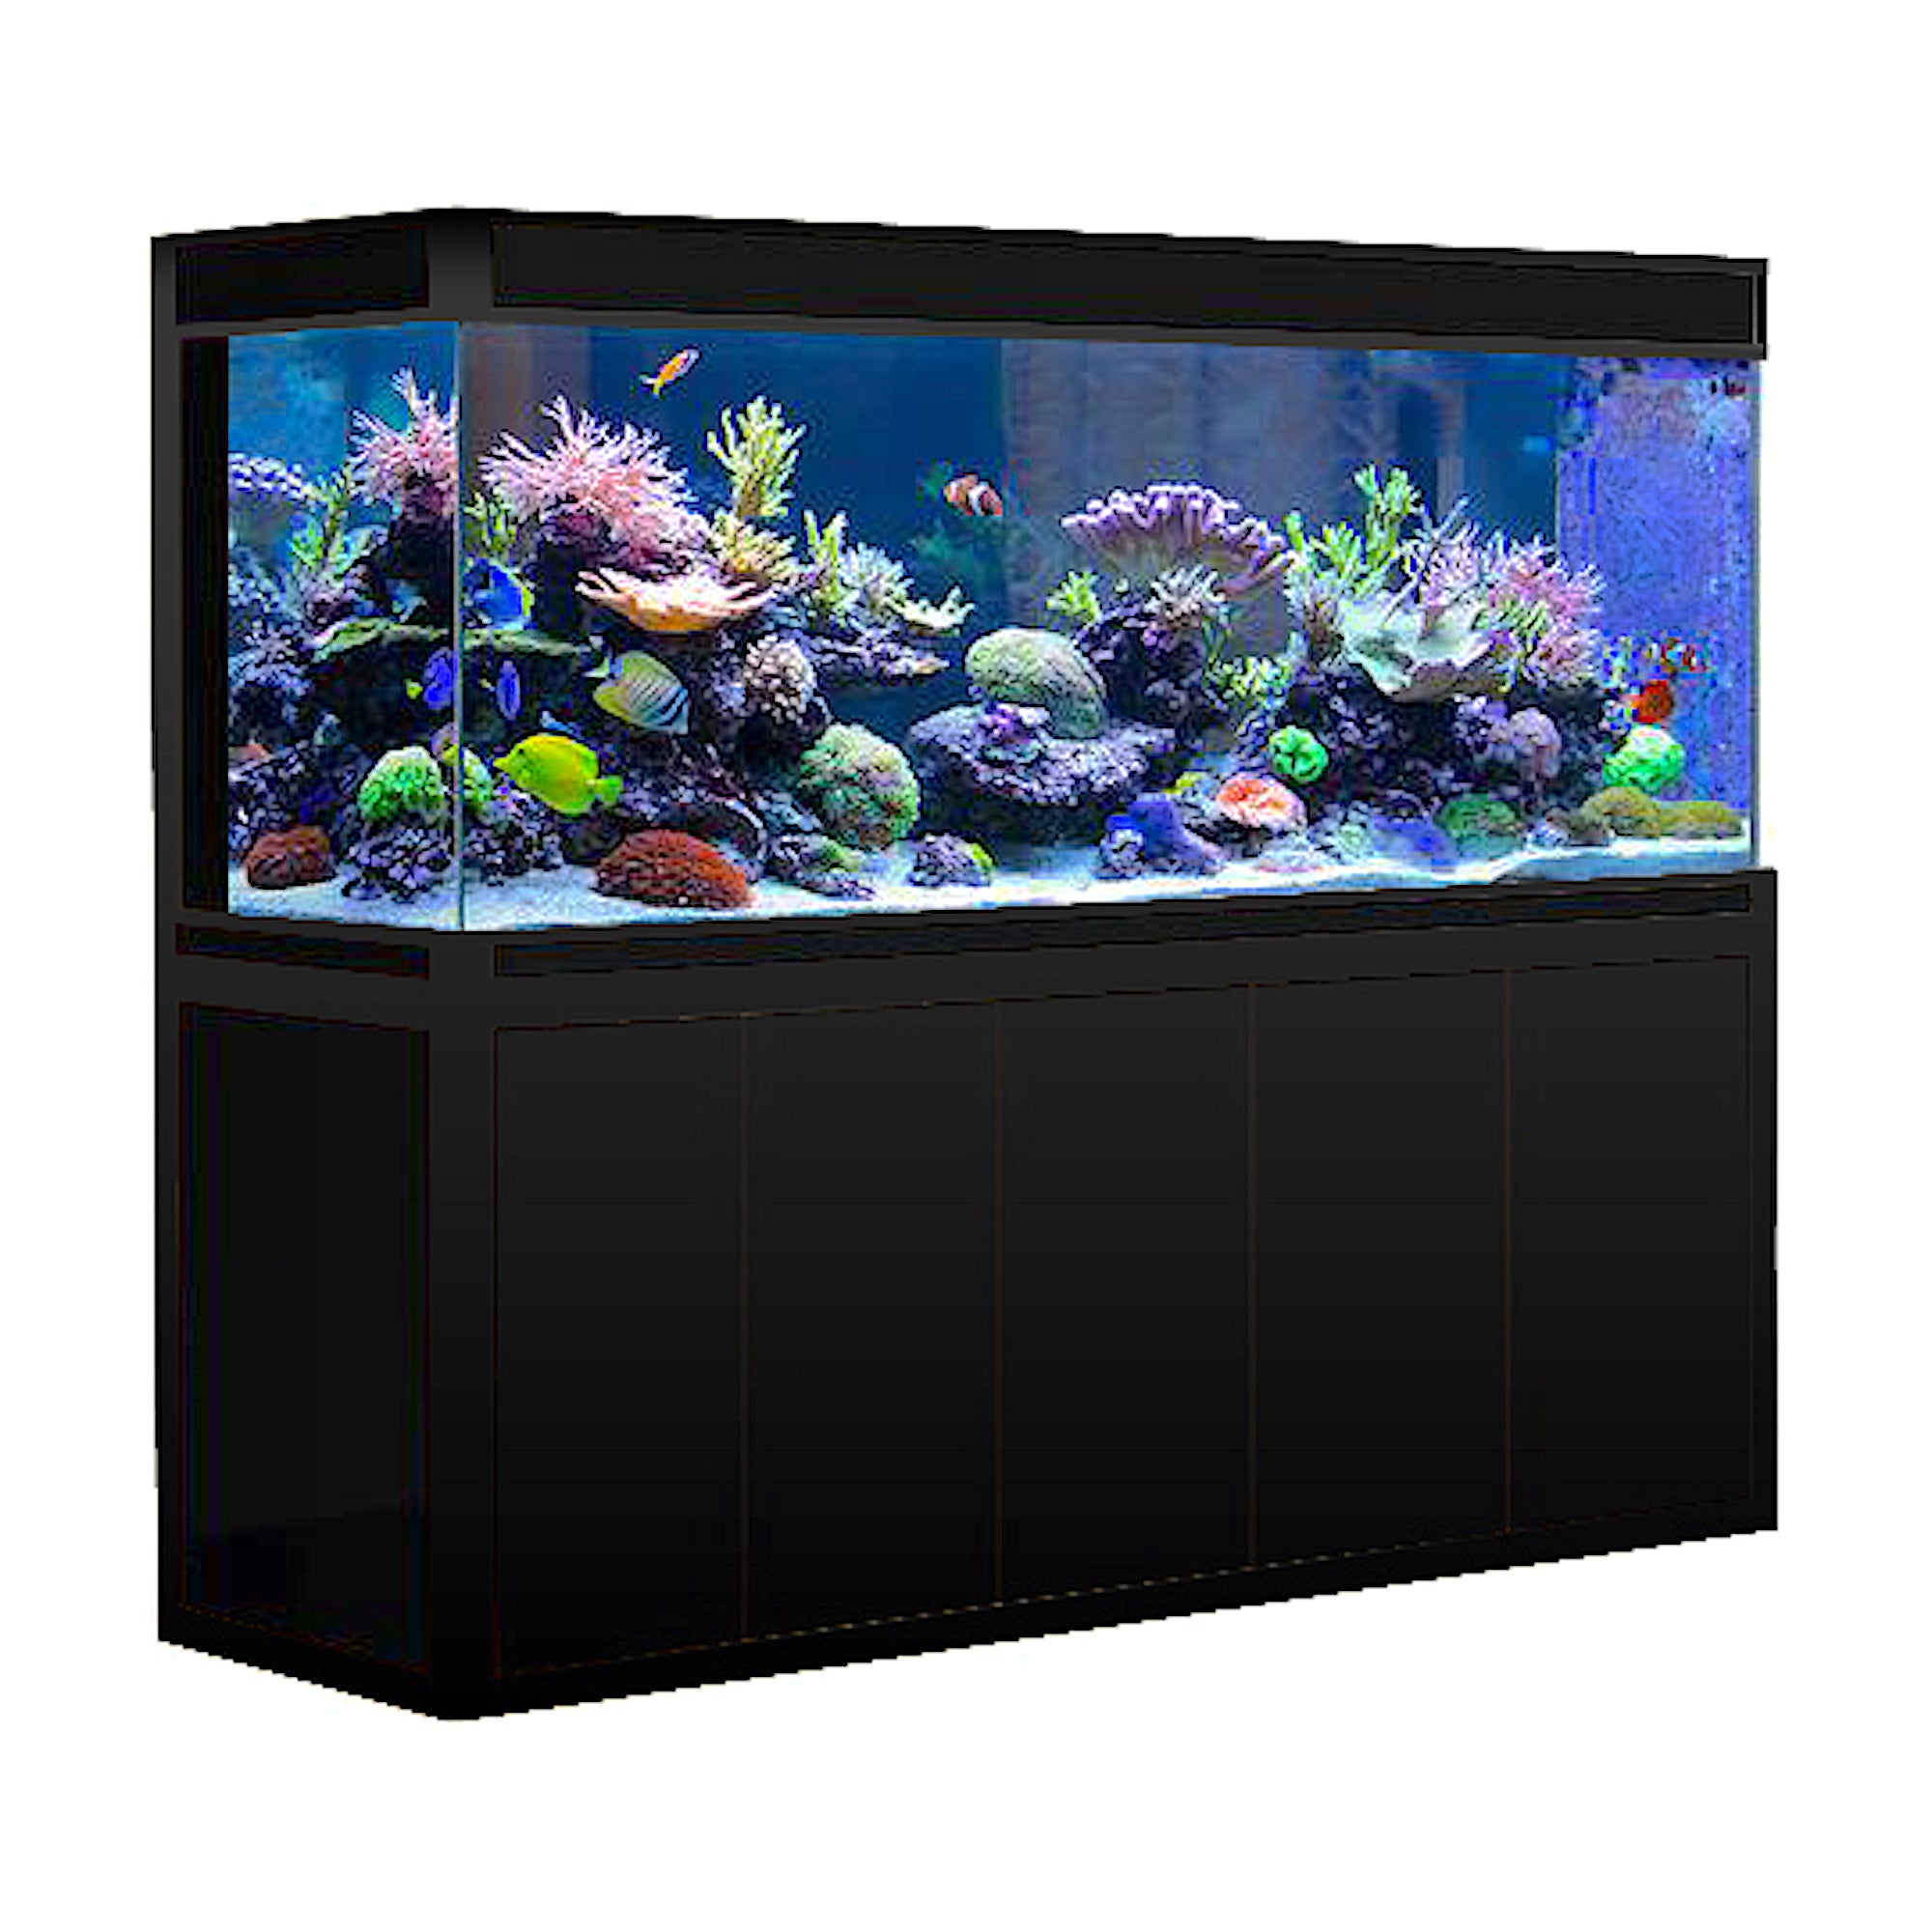 A large fish tank/aquarium on stand. Complete with 'Fluval' light